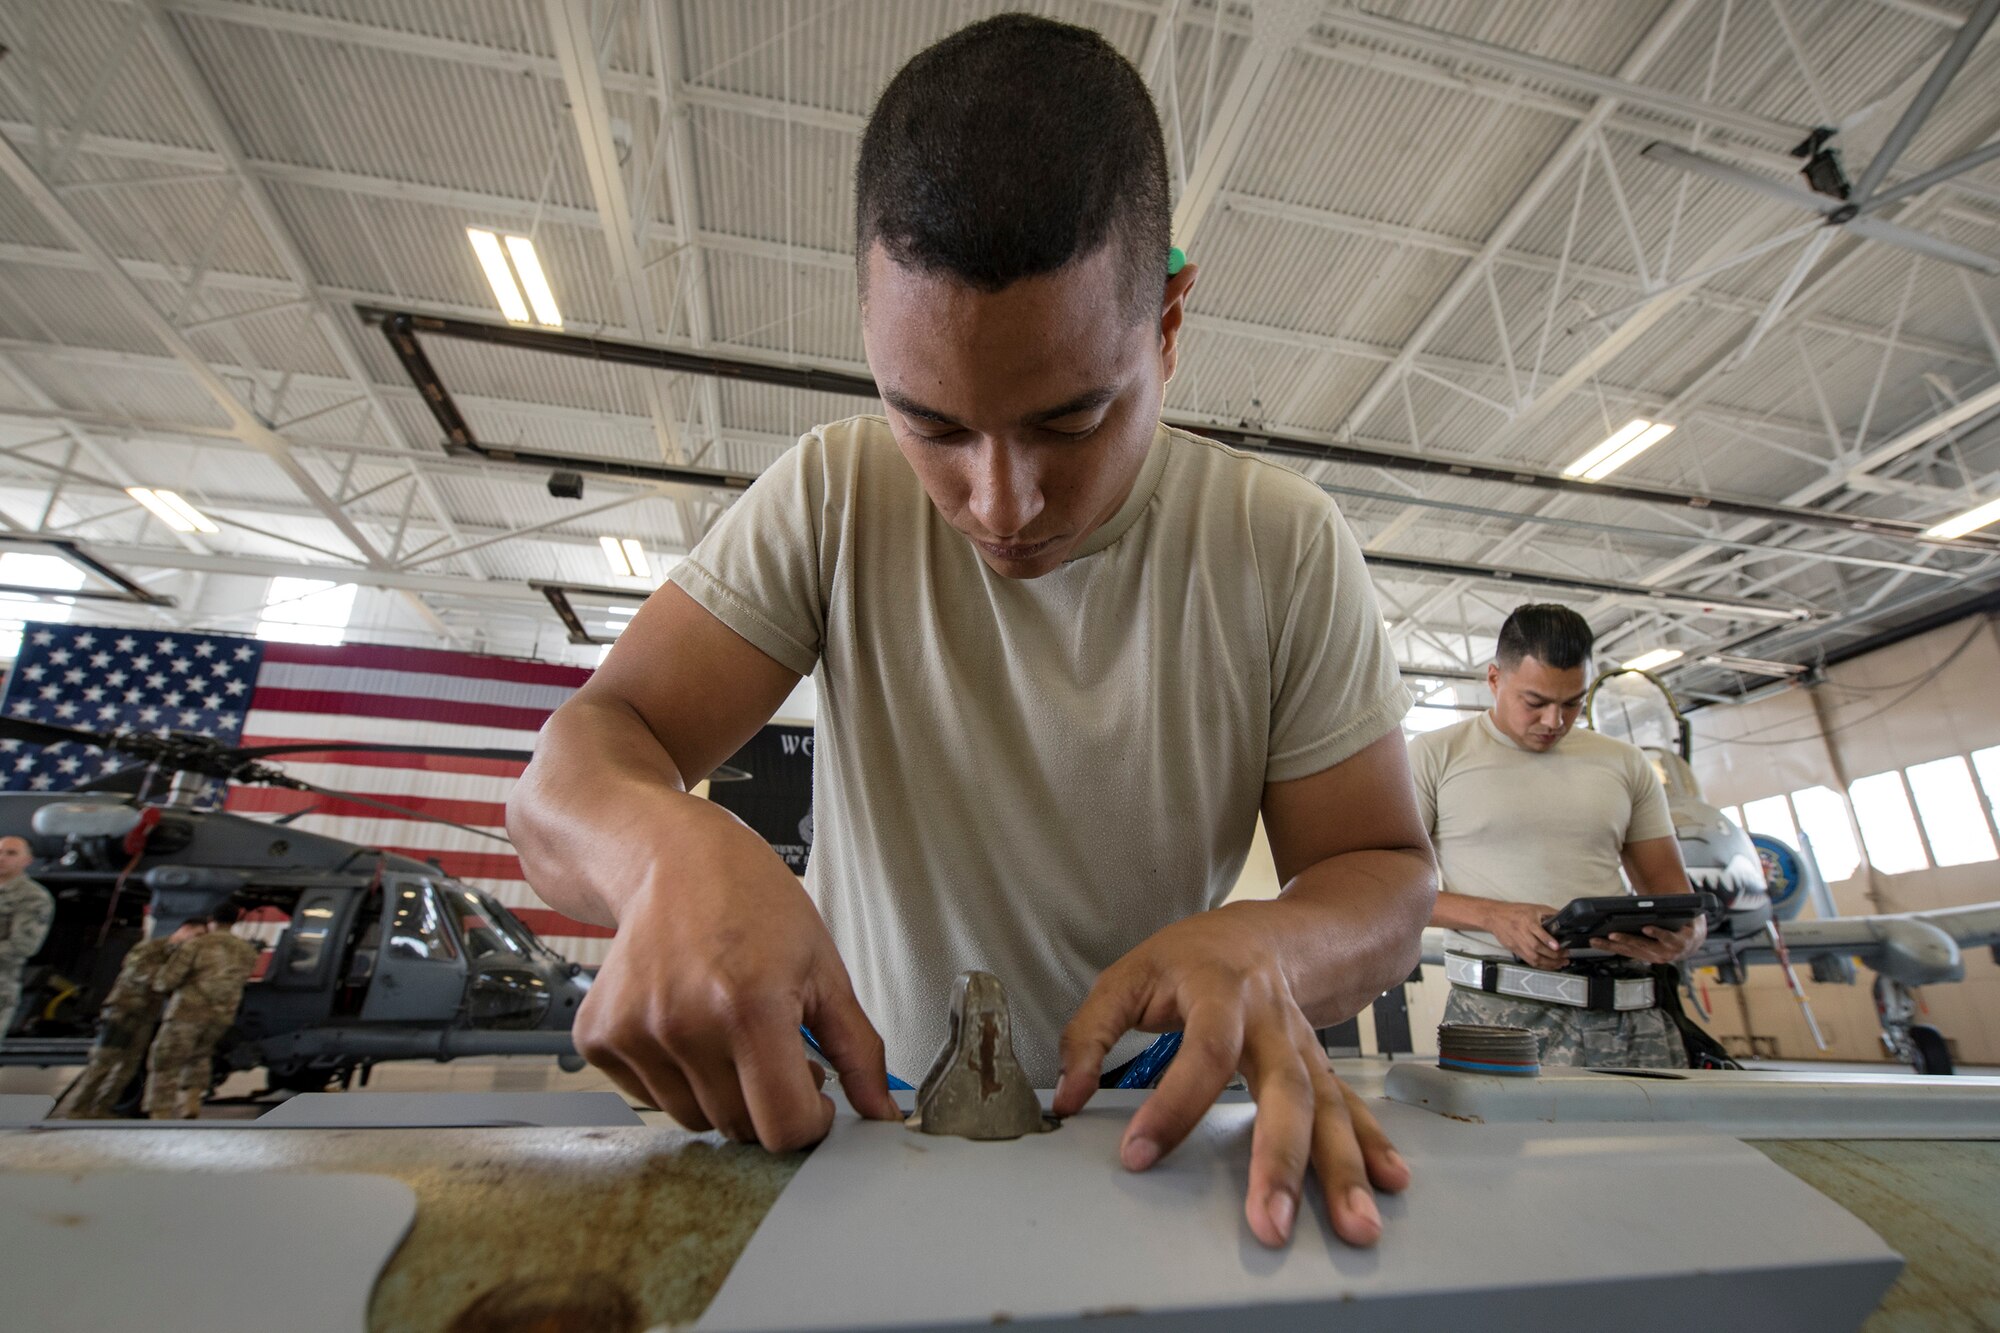 Senior Airman Luis Bautista-Mercedes, 74th Aircraft Maintenance Unit (AMU) weapons load crew member, checks an umbilical on an MK-84 general purpose bomb during a weapons-load competition, April 6, 2018, at Moody Air Force Base, Ga. During the load portion of the competition Airmen from the 74th and 75th AMU were assessed on their ability to quickly and efficiently load munitions onto an A-10. They were also judged on dress and appearance and a written test based on munitions knowledge. (U.S. Air Force photo by Airman Eugene Oliver)